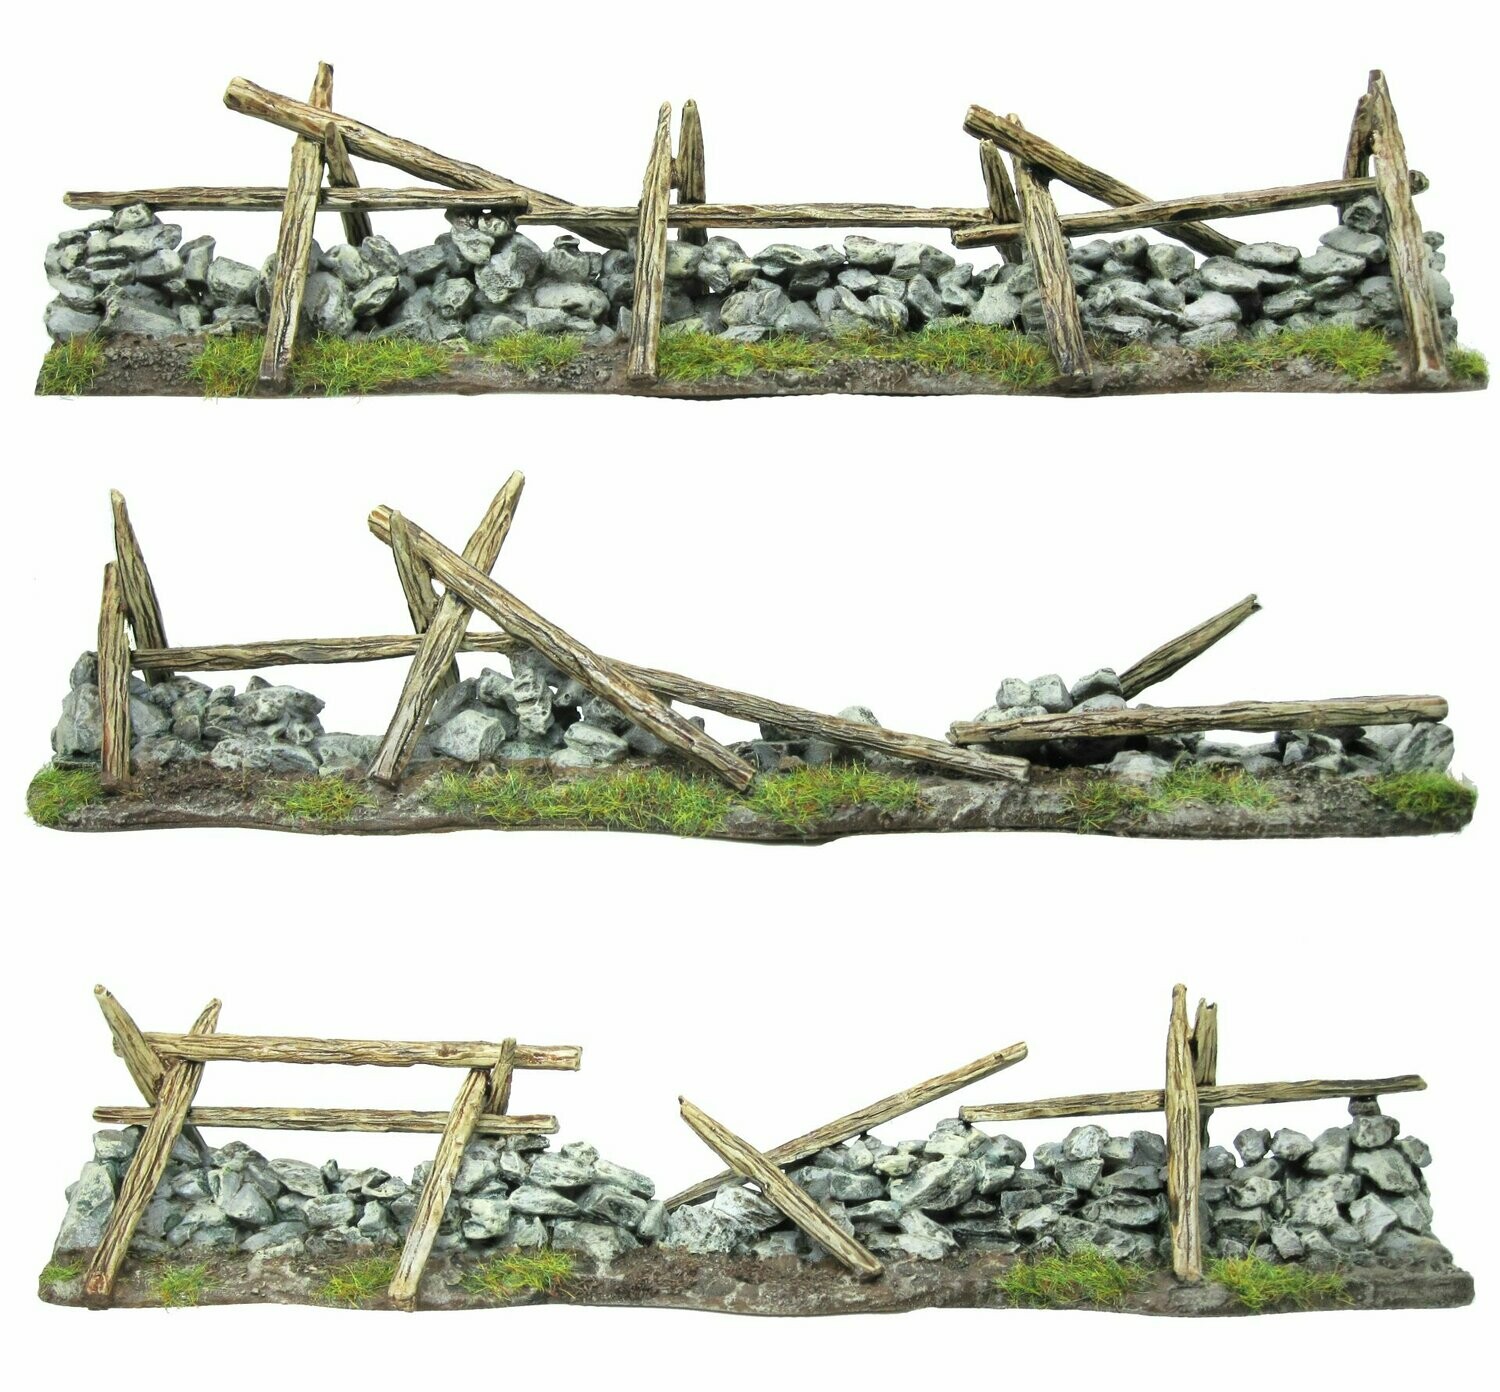 Stone walls with wood rails